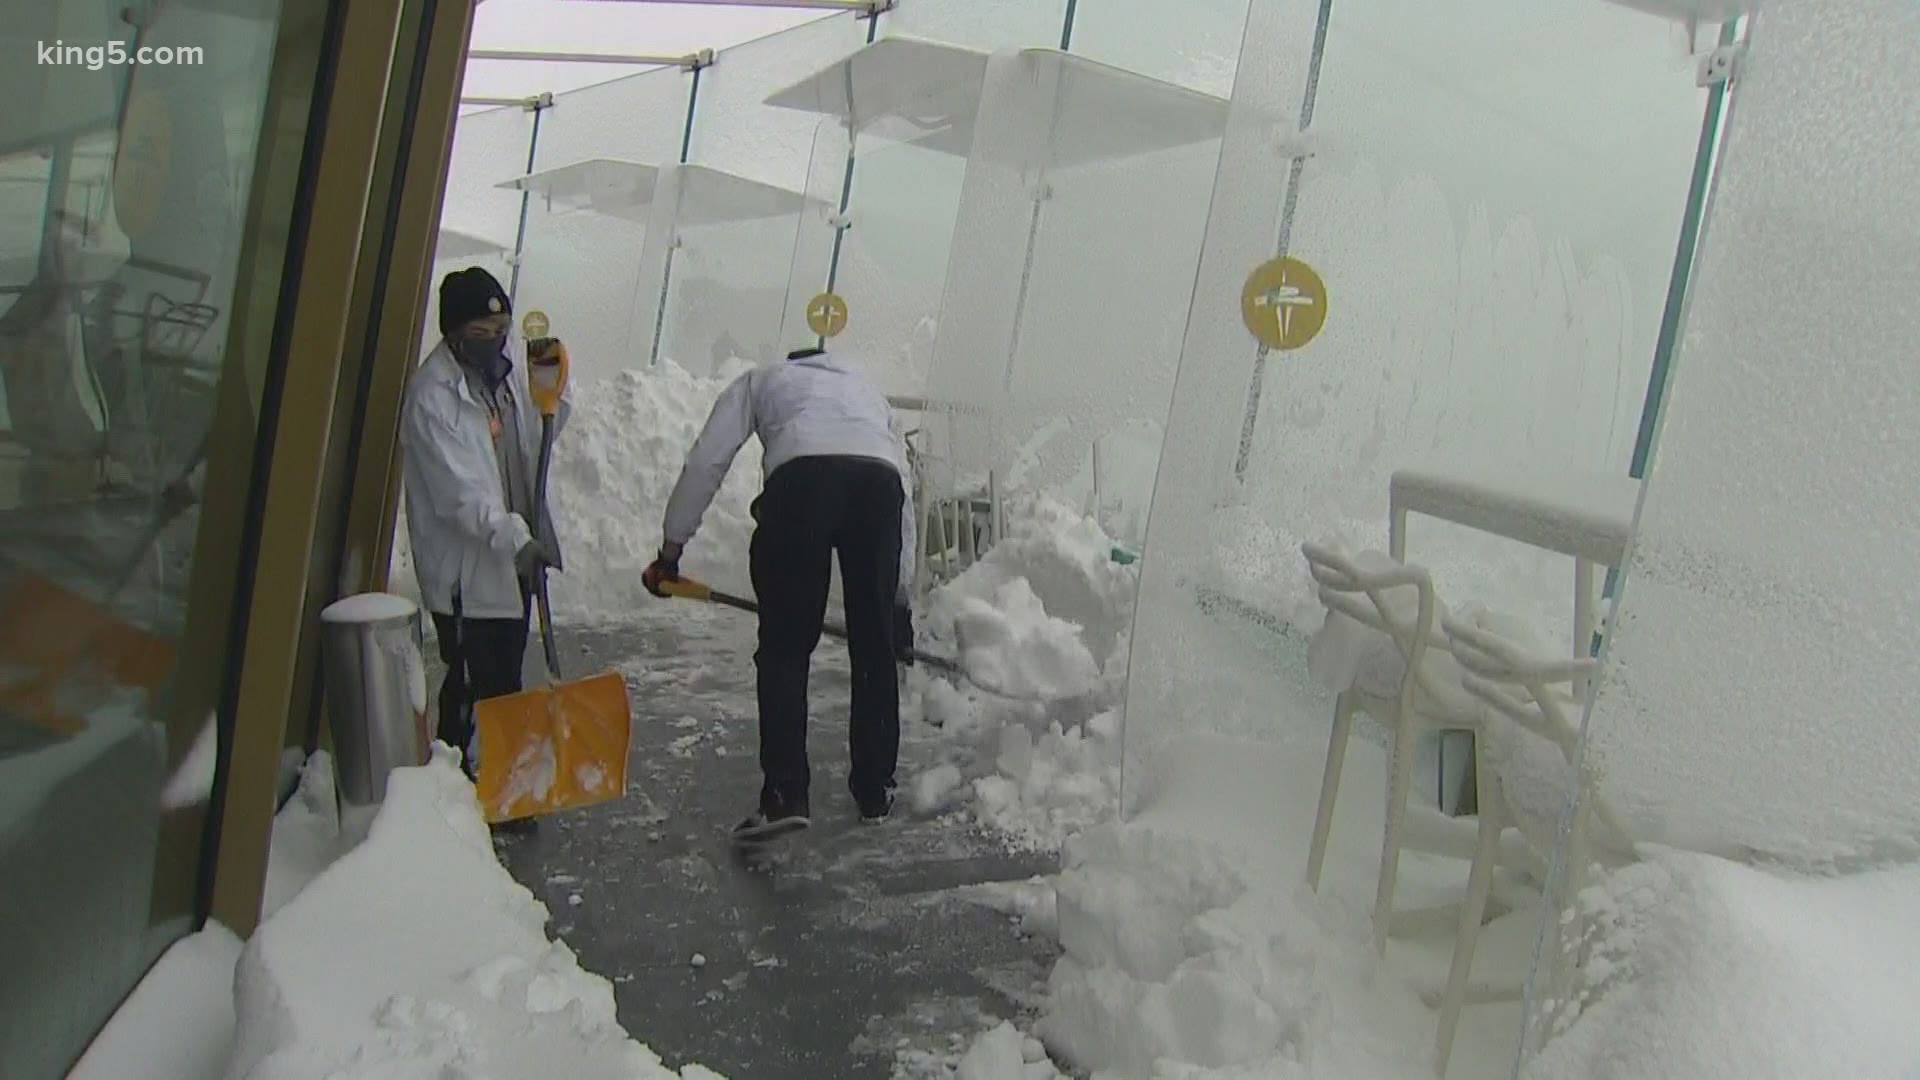 The weekend snow storm posed a unique challenge for workers at the Seattle Space Needle.